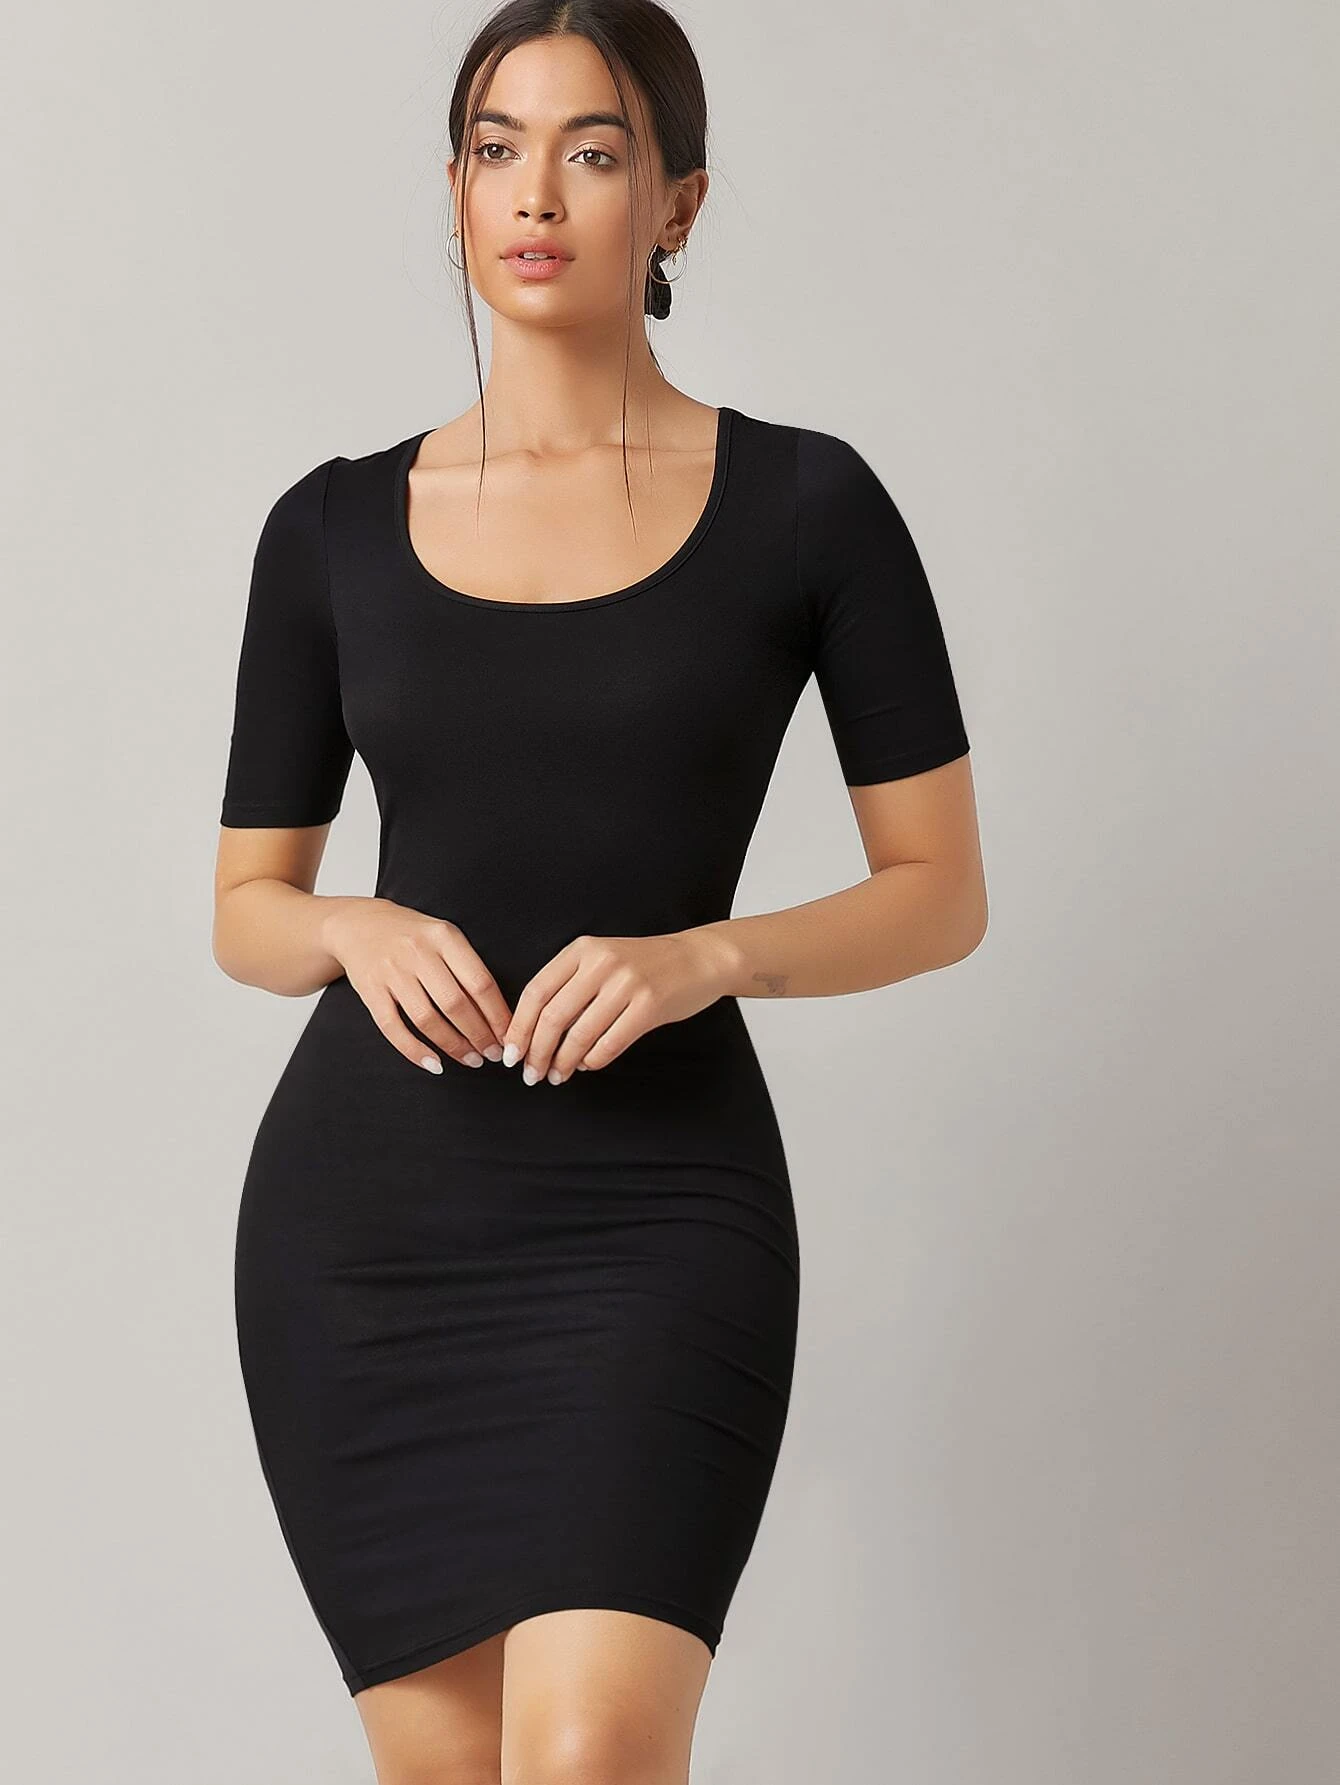 Scoop Neck Bodycon Dress Black – Styched Fashion